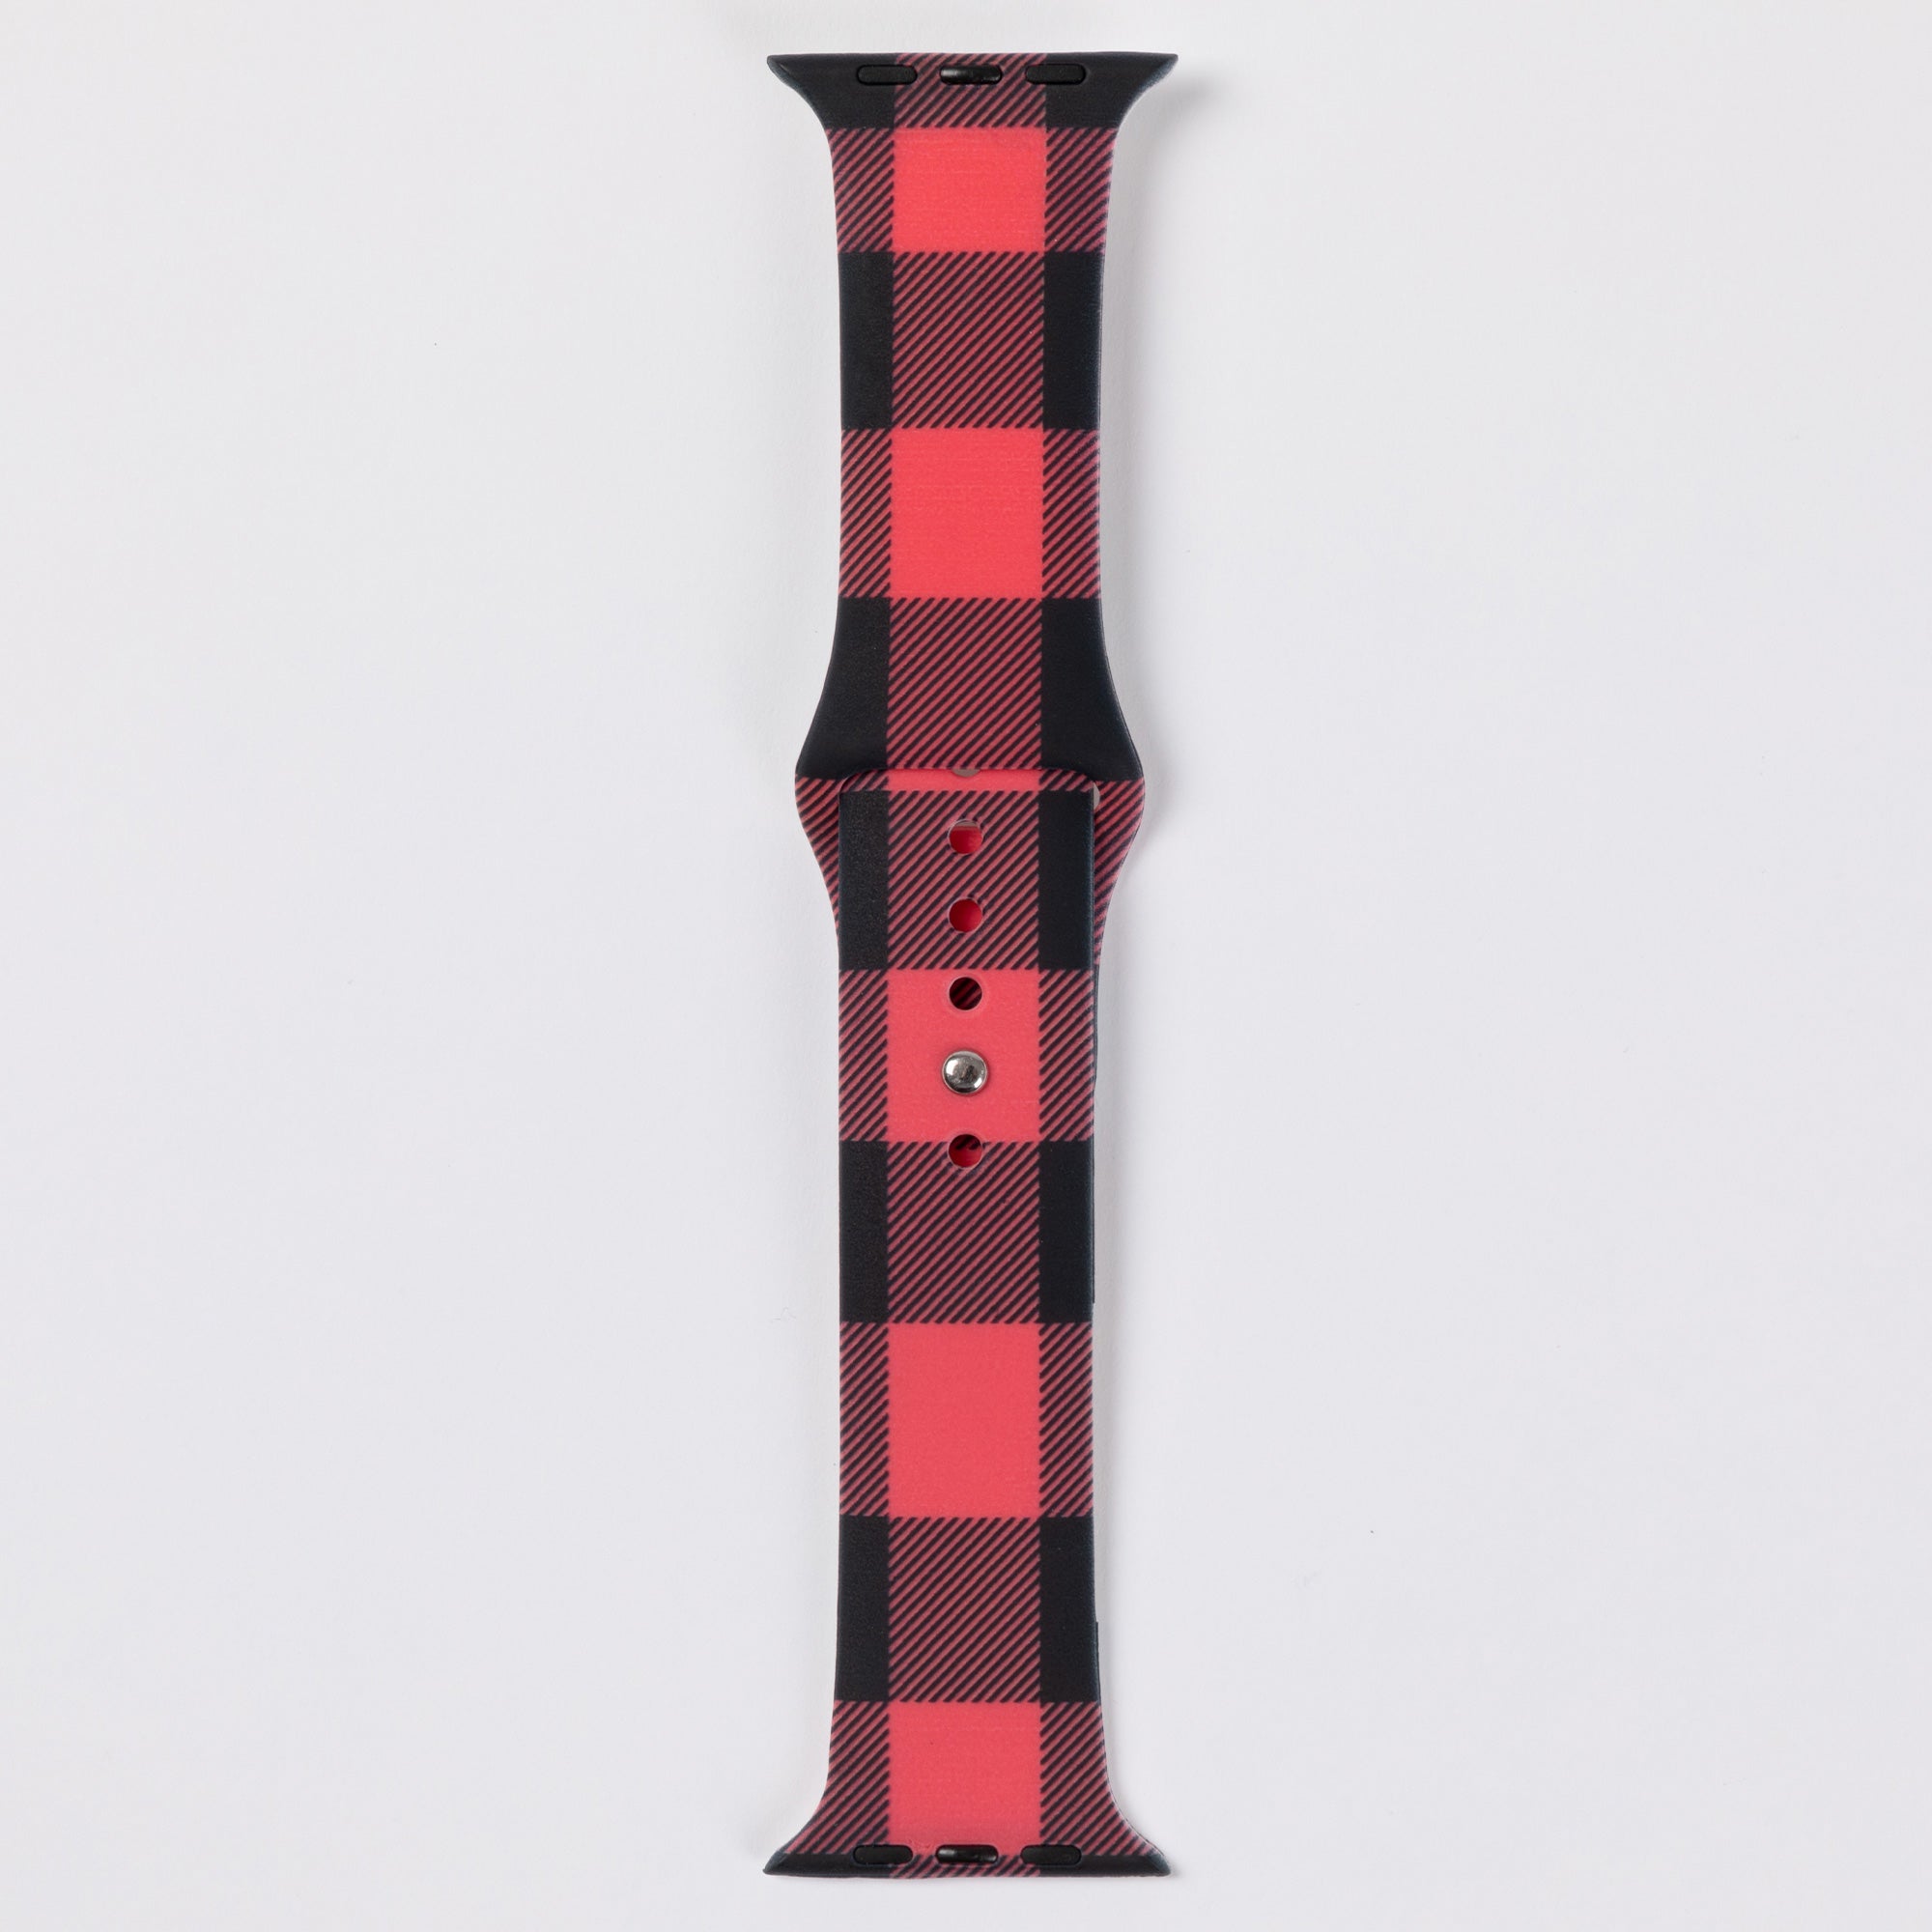 Patterned Silicone Apple Watch Band 38mm/40mm 42mm/44mm - Red & Black Buffalo Plaid - 42mm/44mm